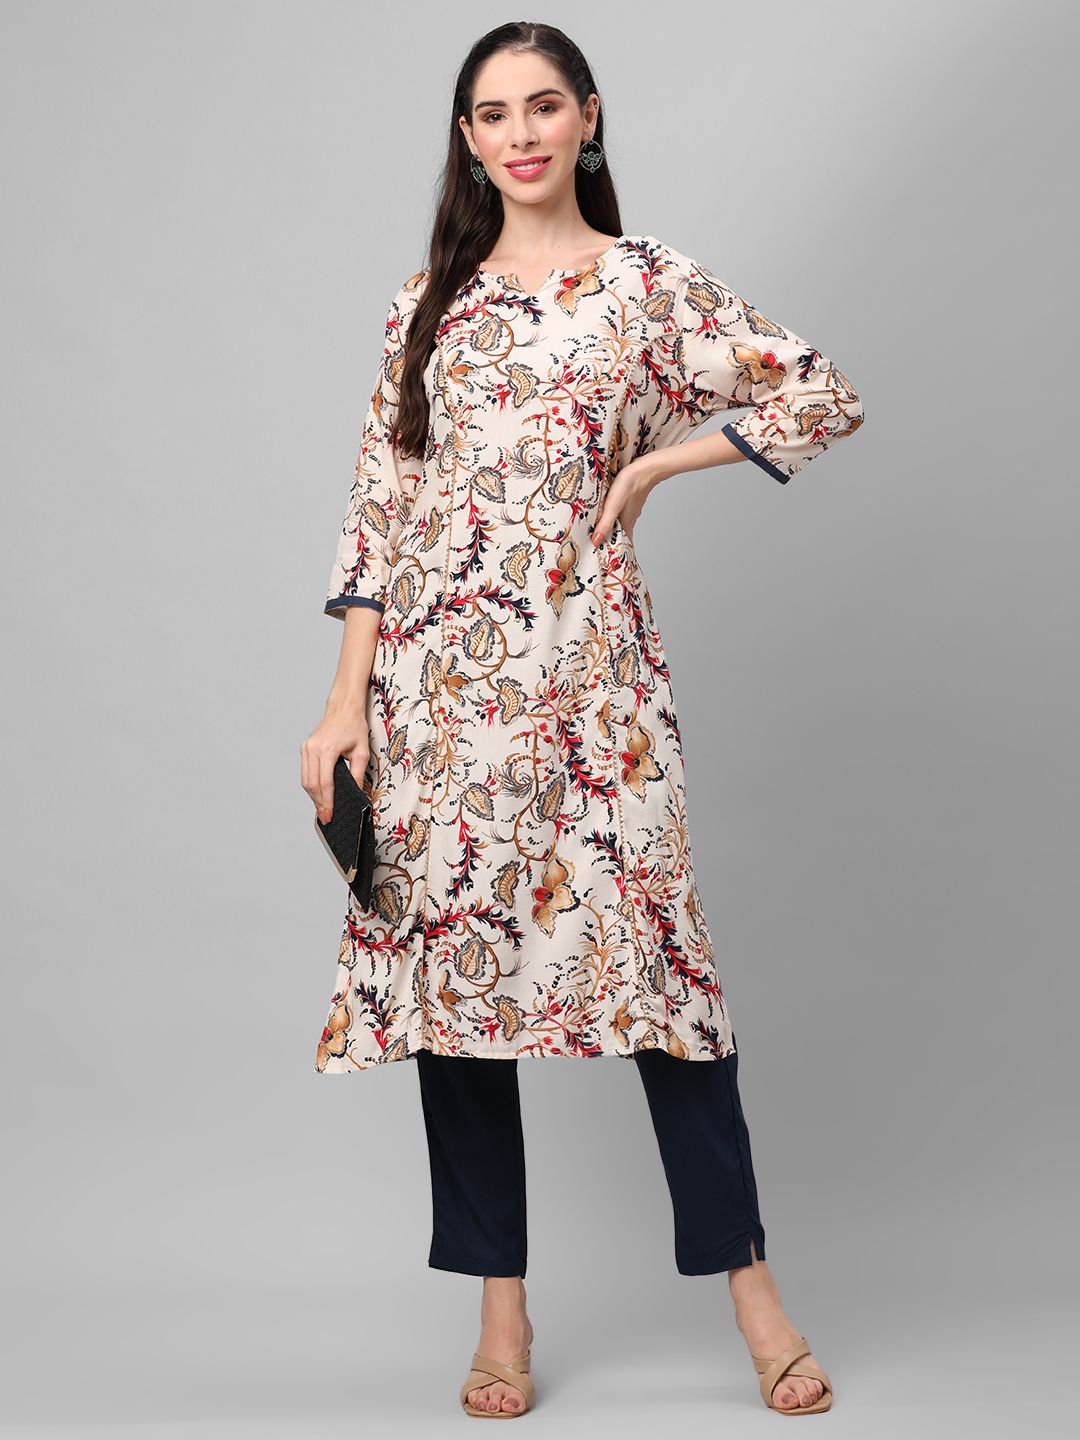 Floral Printed Kurta With Trouser Front